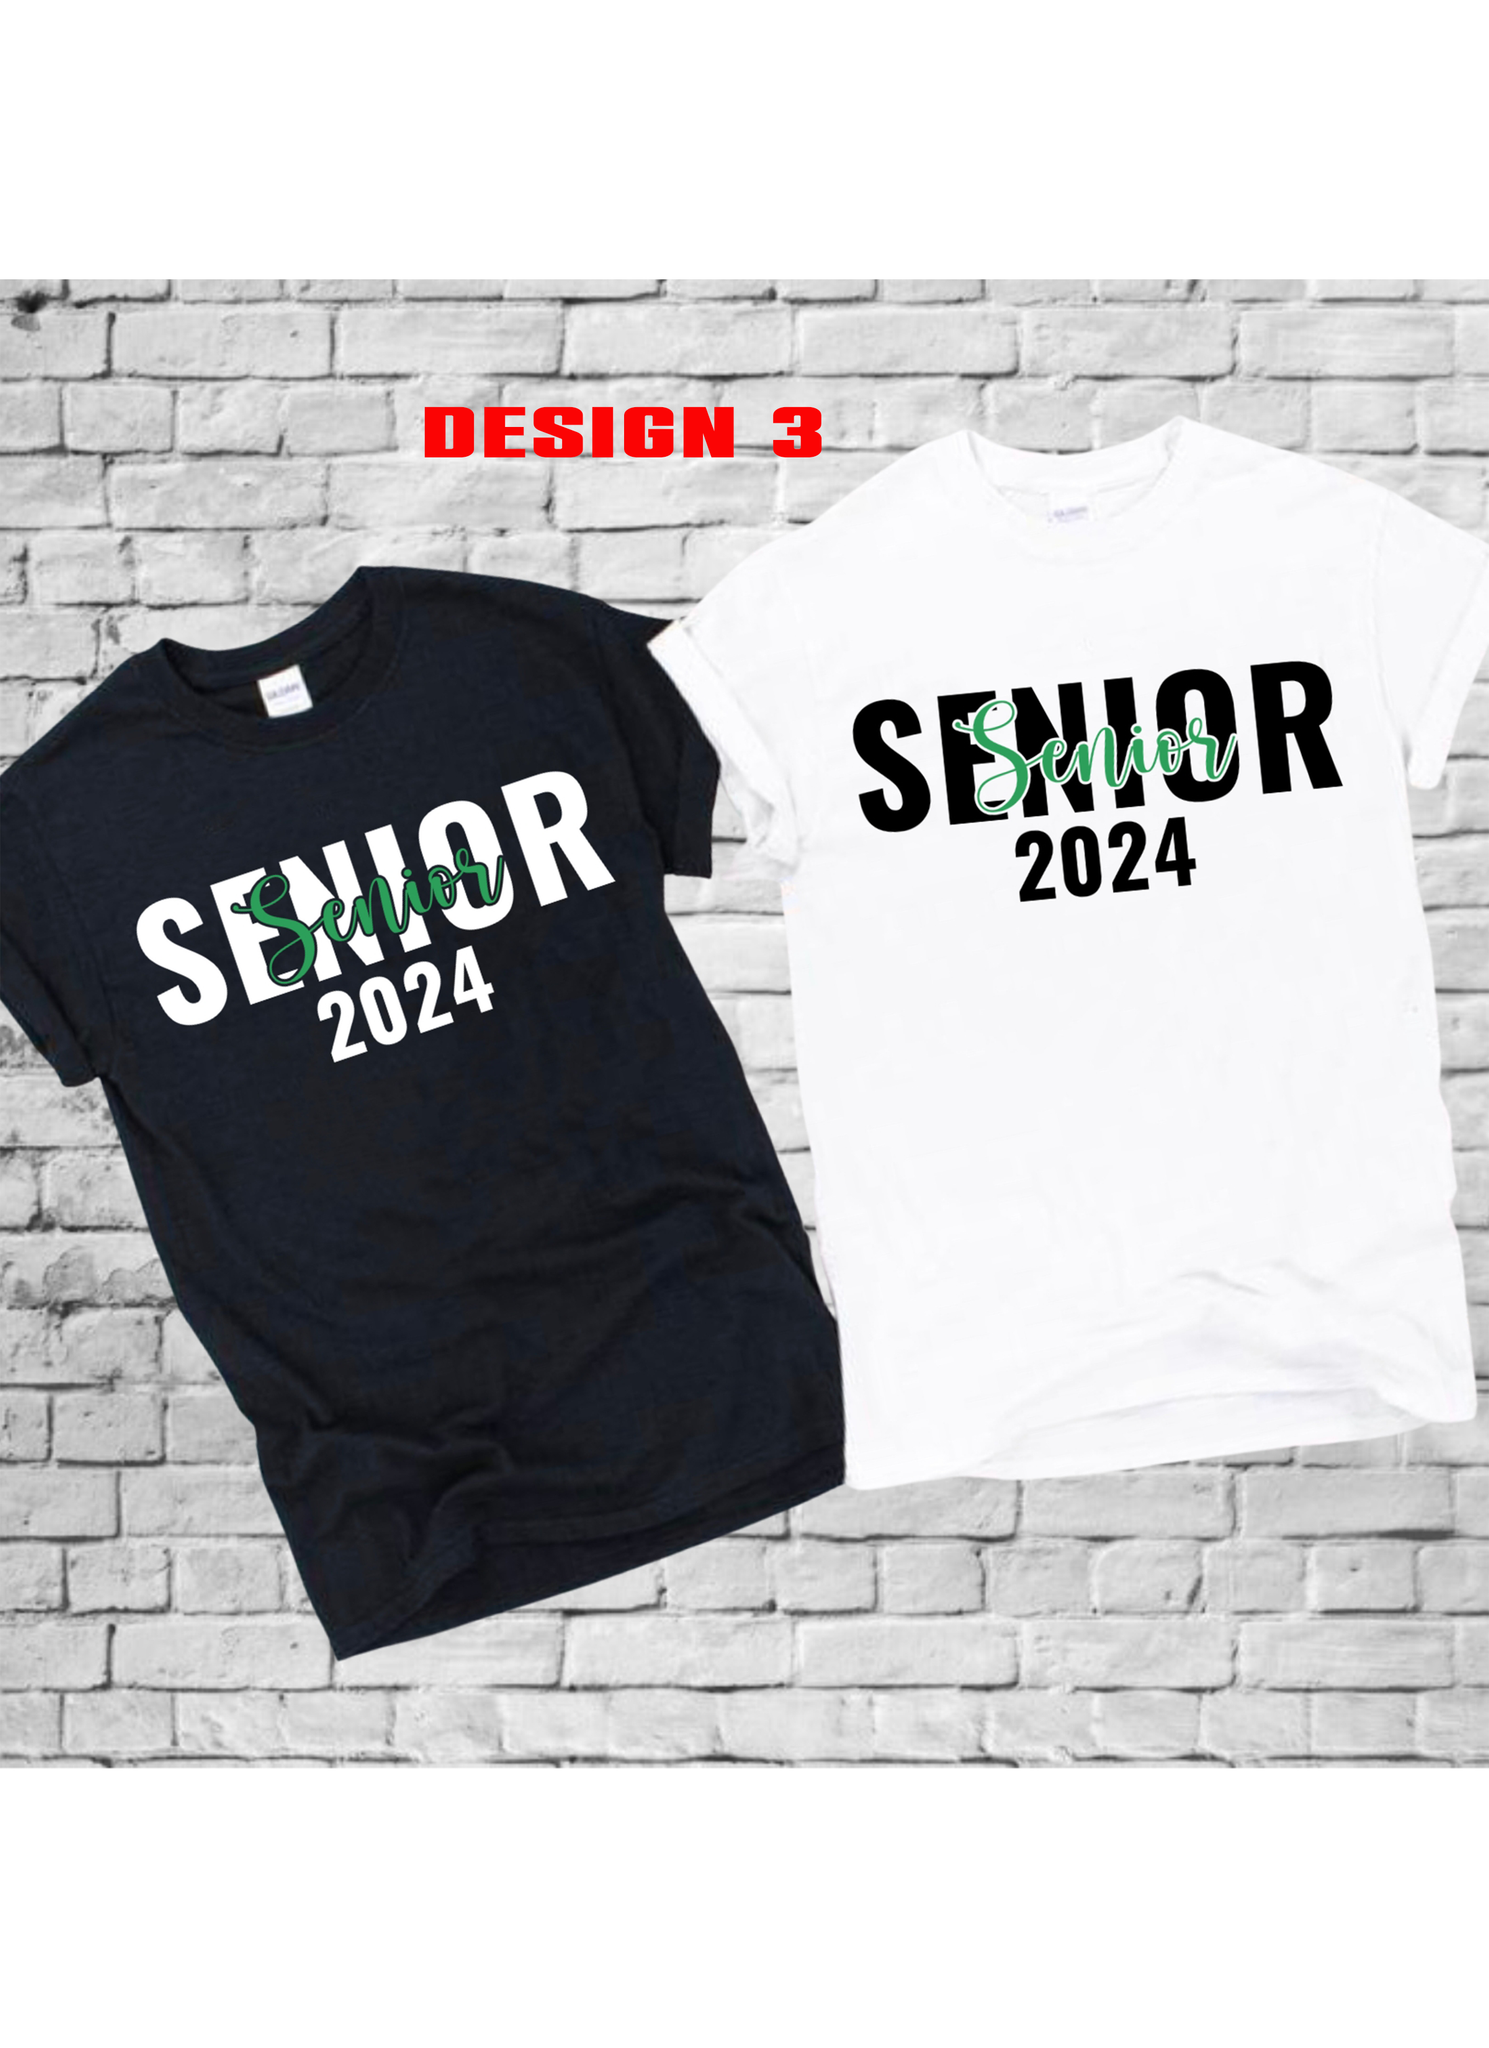 Best T-Shirt Press options in 2024